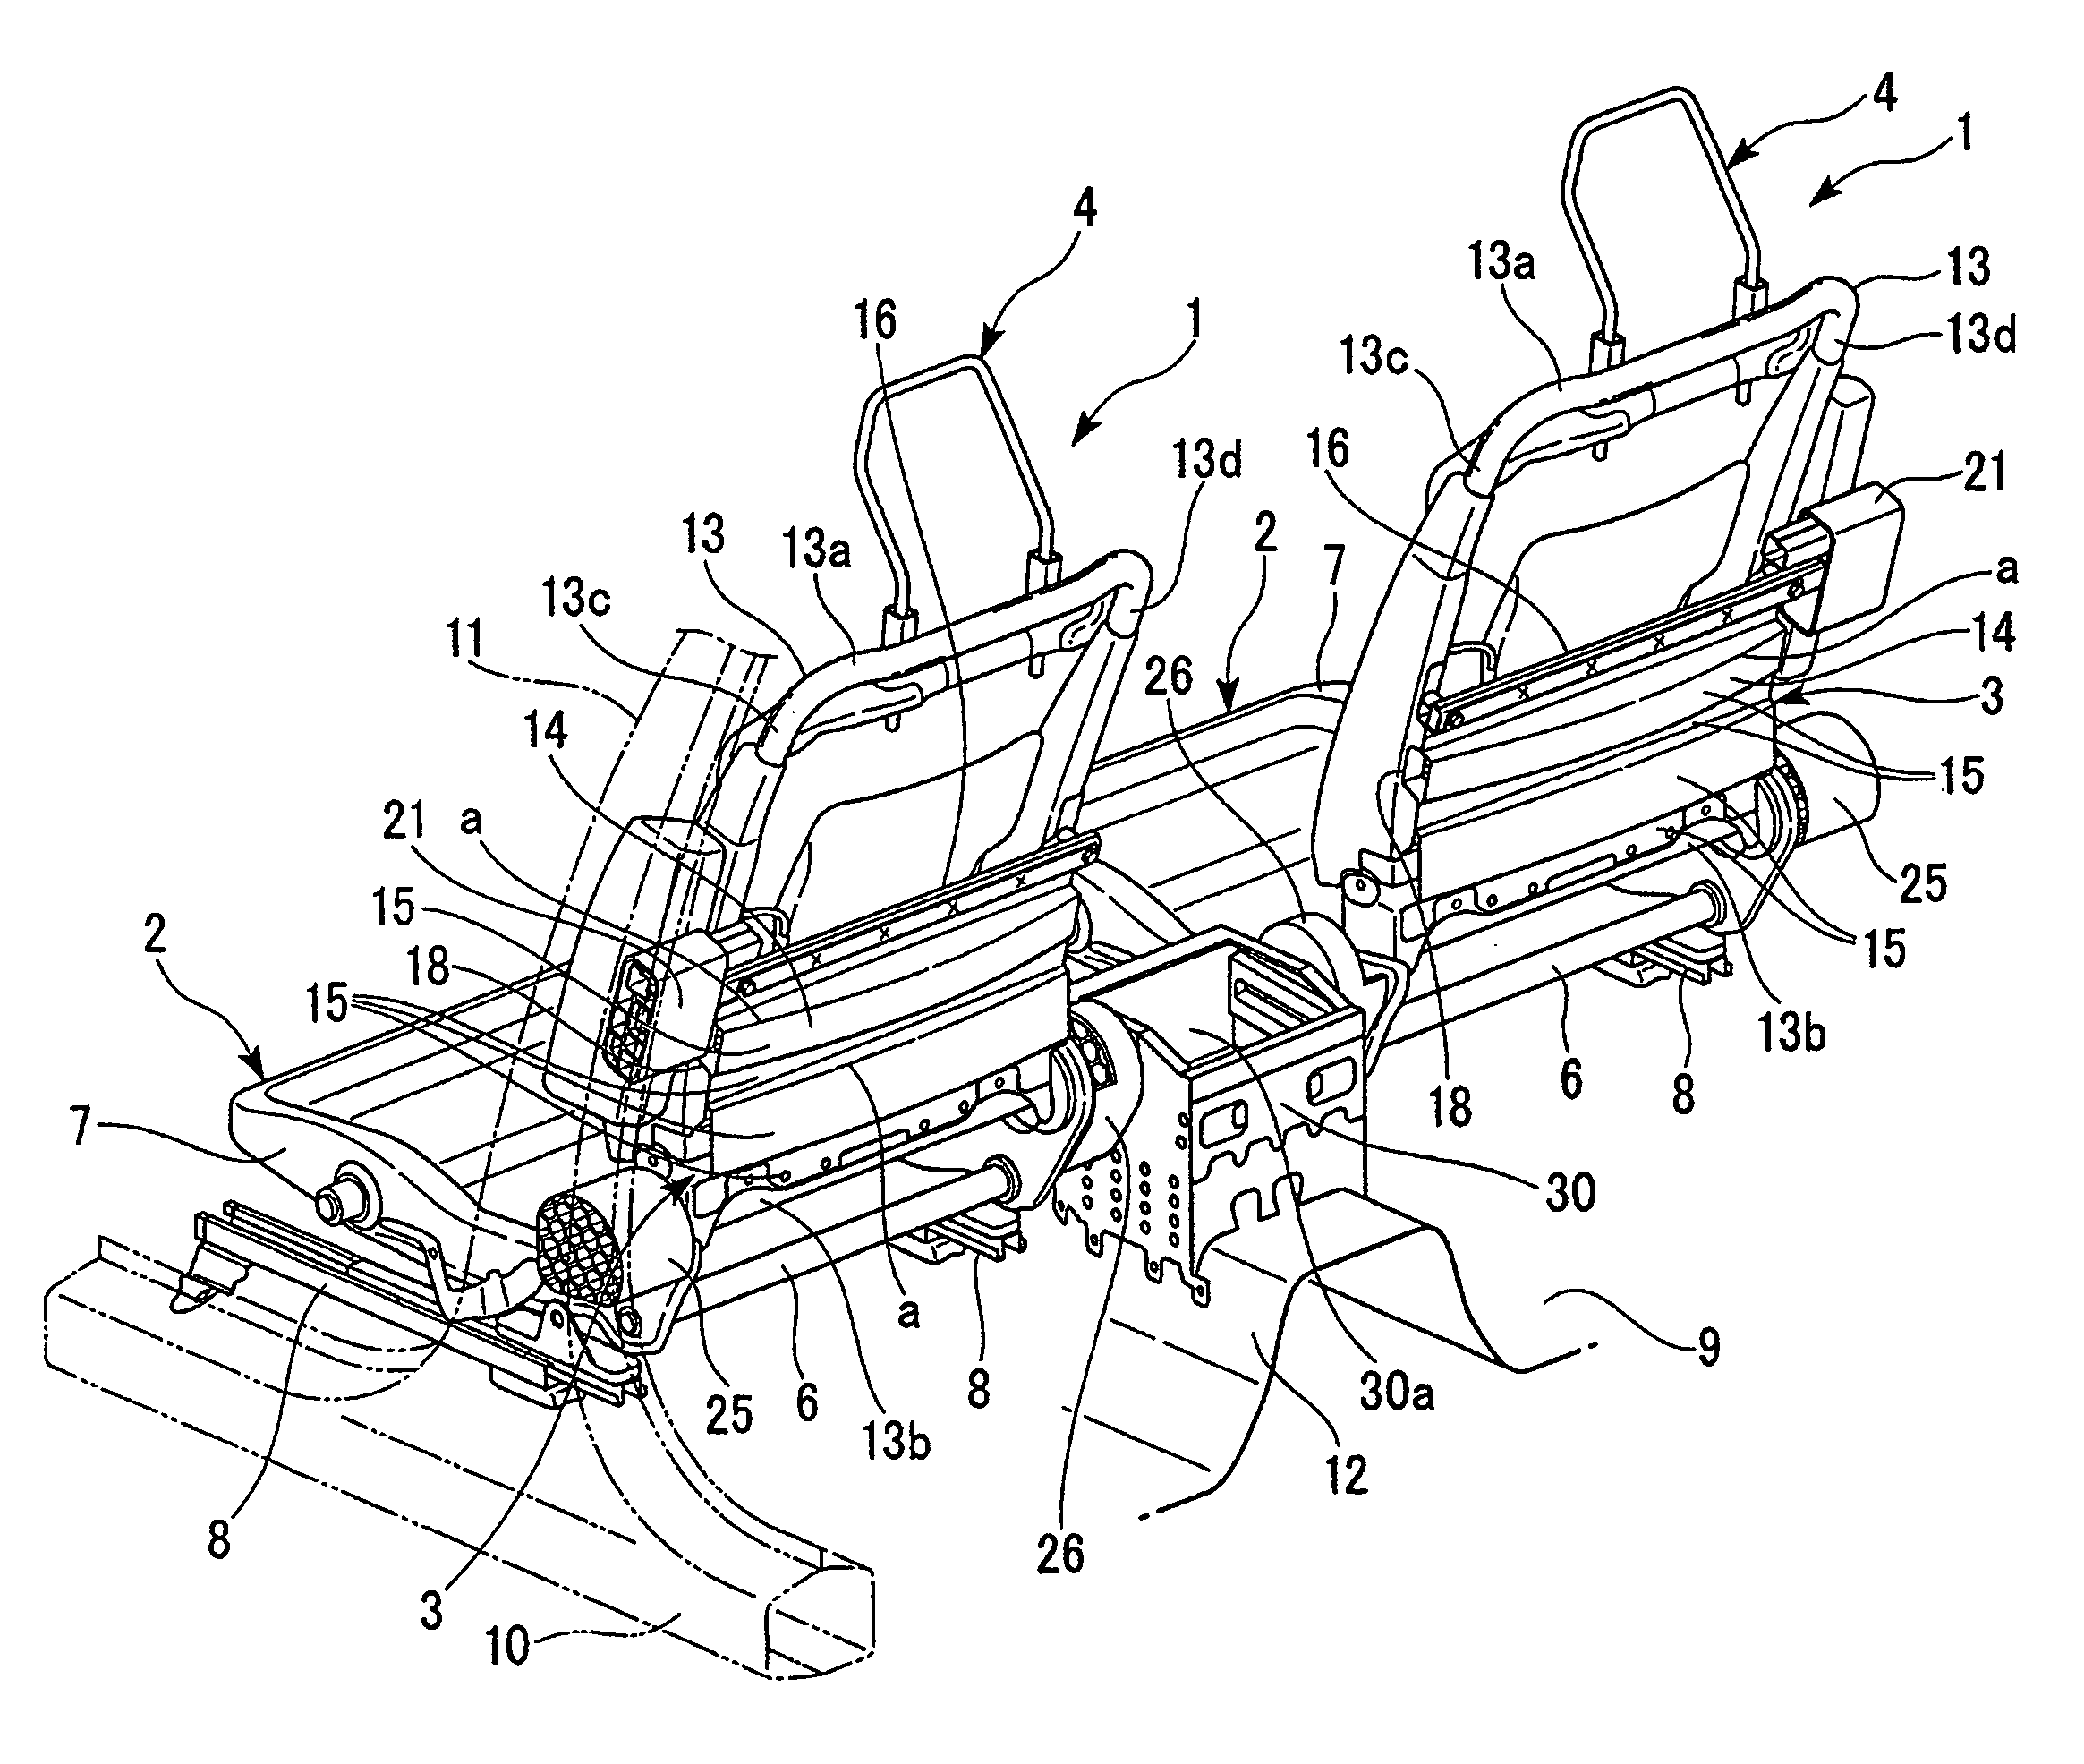 Load transmission body for vehicle